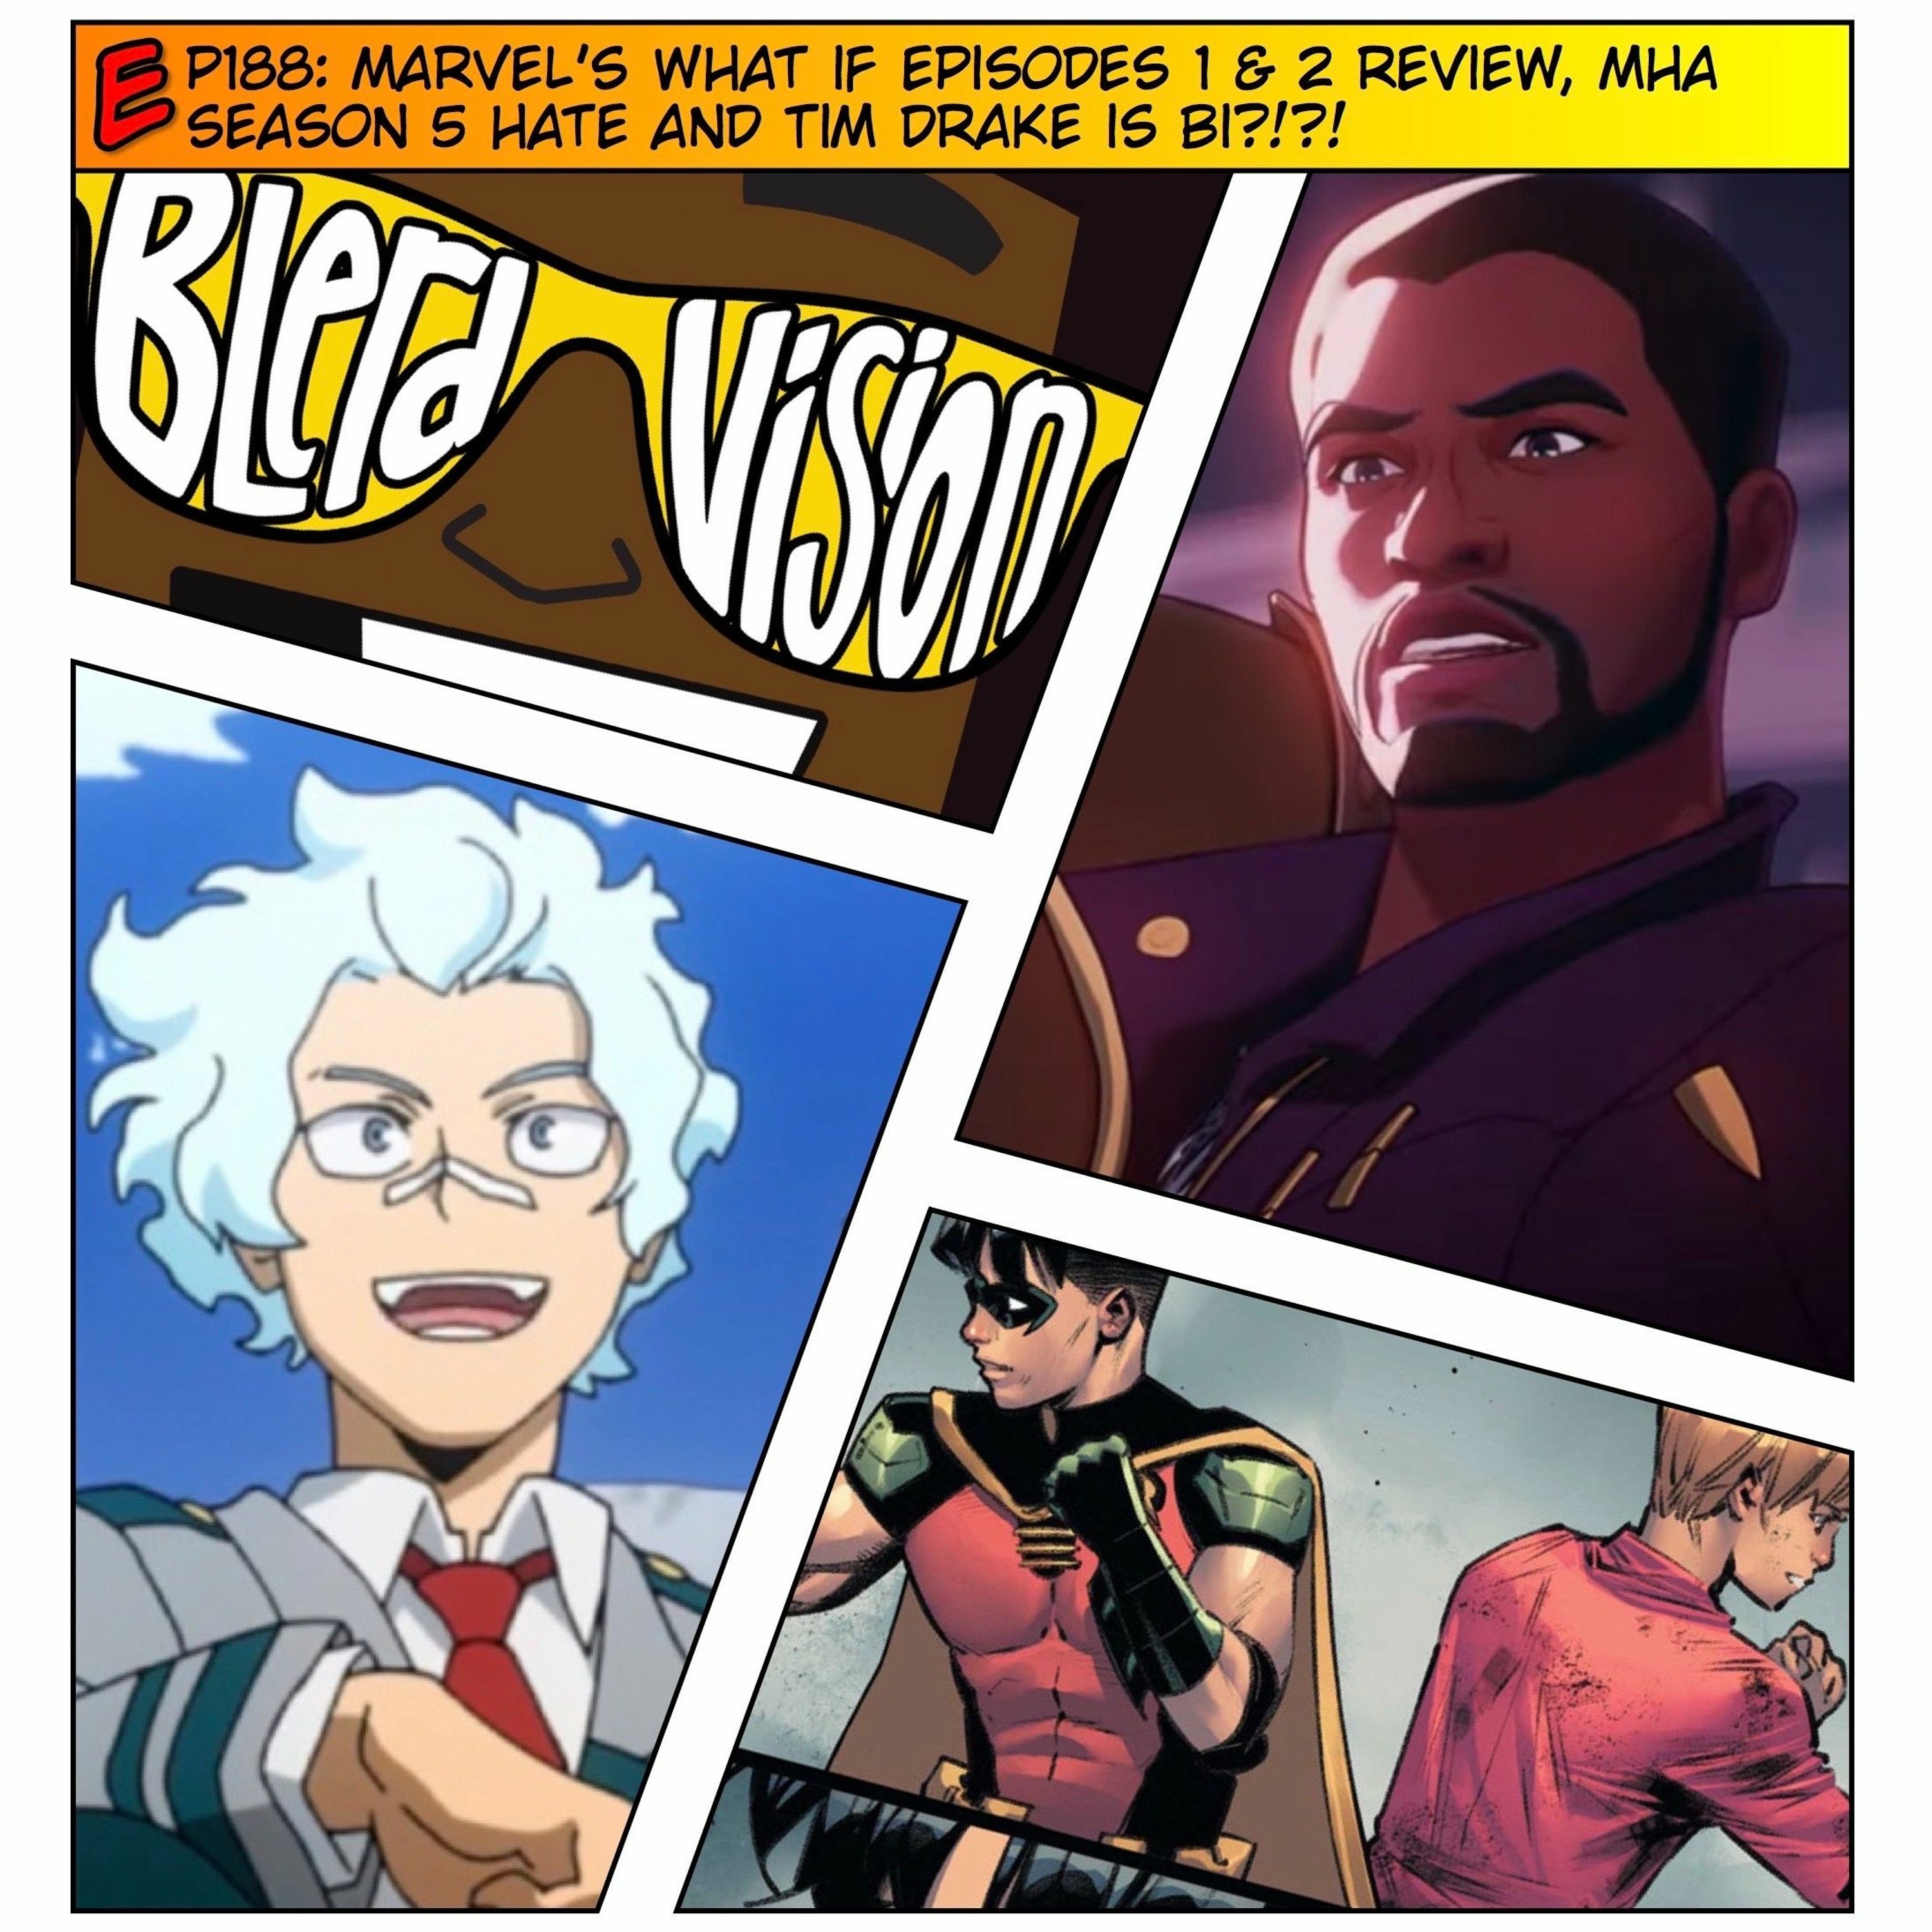 EP188: Marvel's WHAT IF Episodes 1 & 2 Review, MHA Season 5 Hate and Tim Drake is Bi?!?!